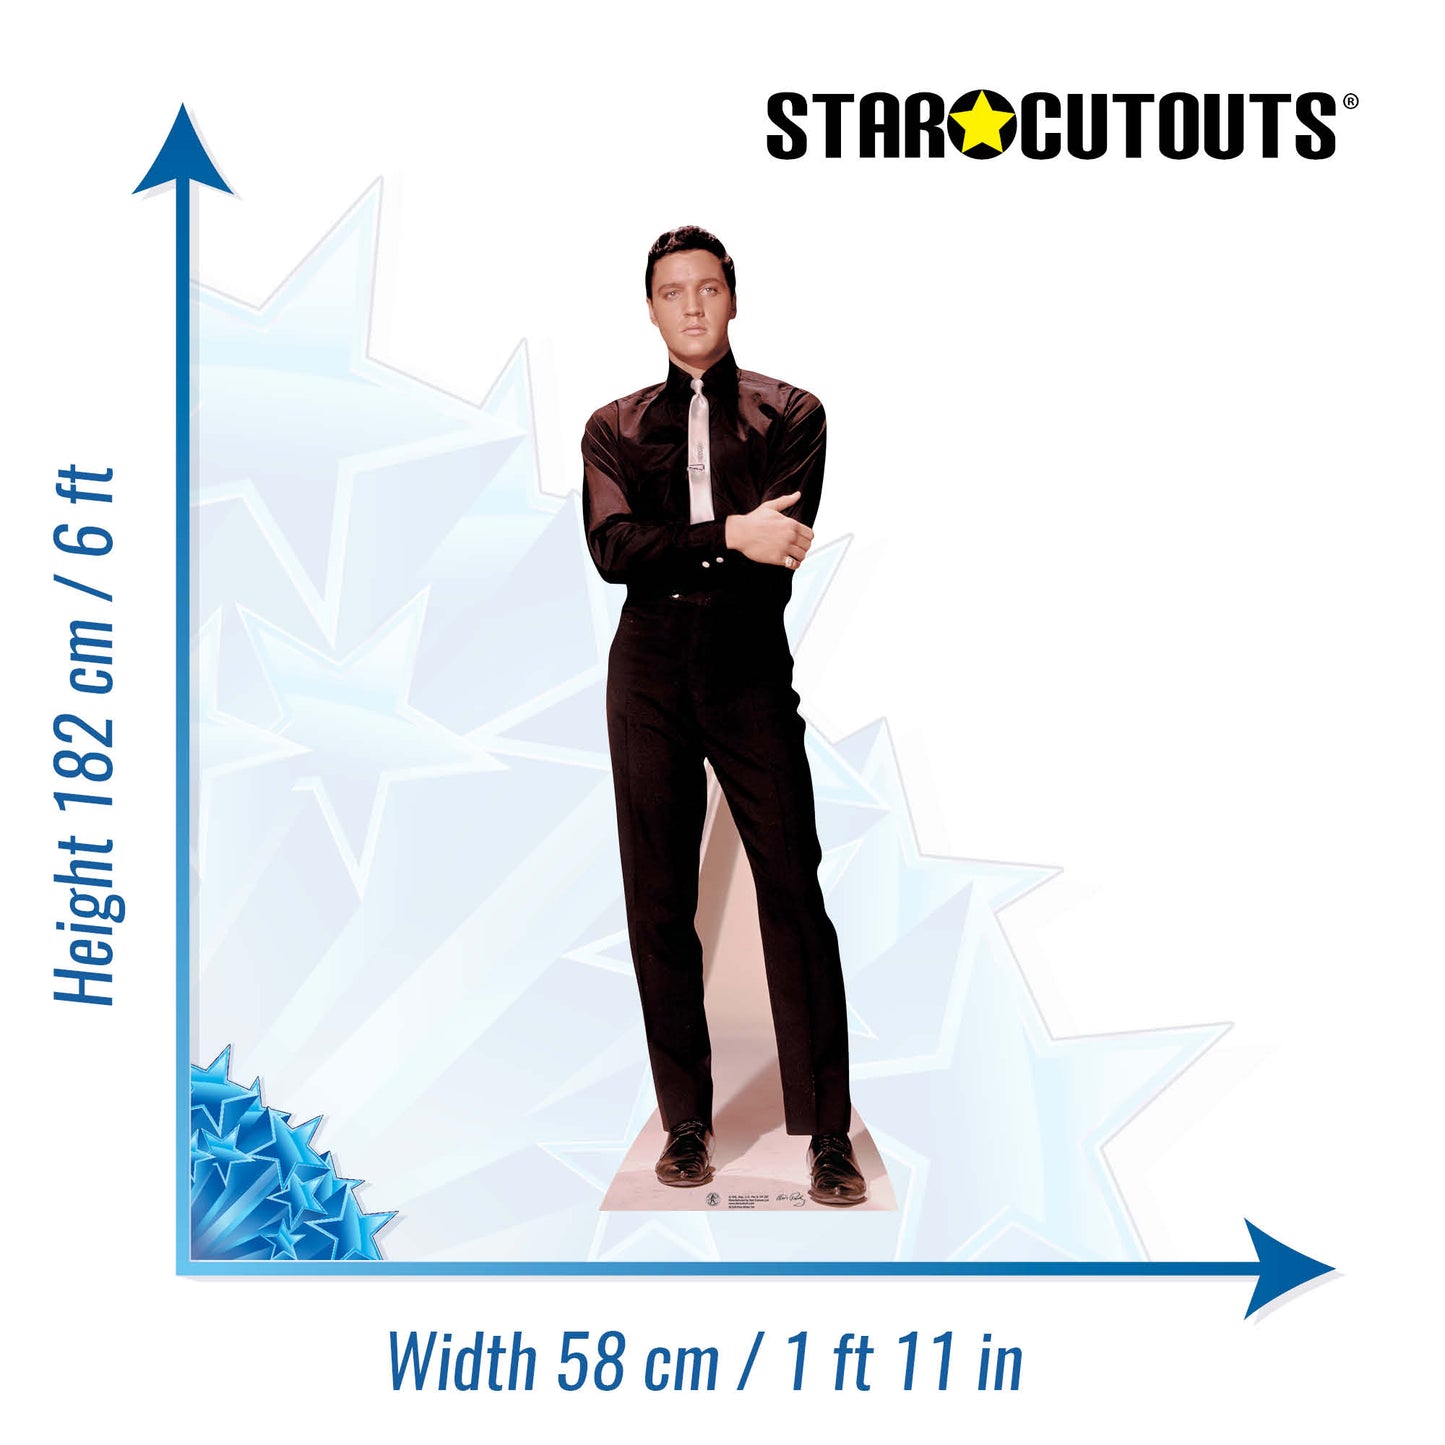 Elvis in Black Suit and White Tie Cardboard Cutout MyCardboardCutout size of cutout